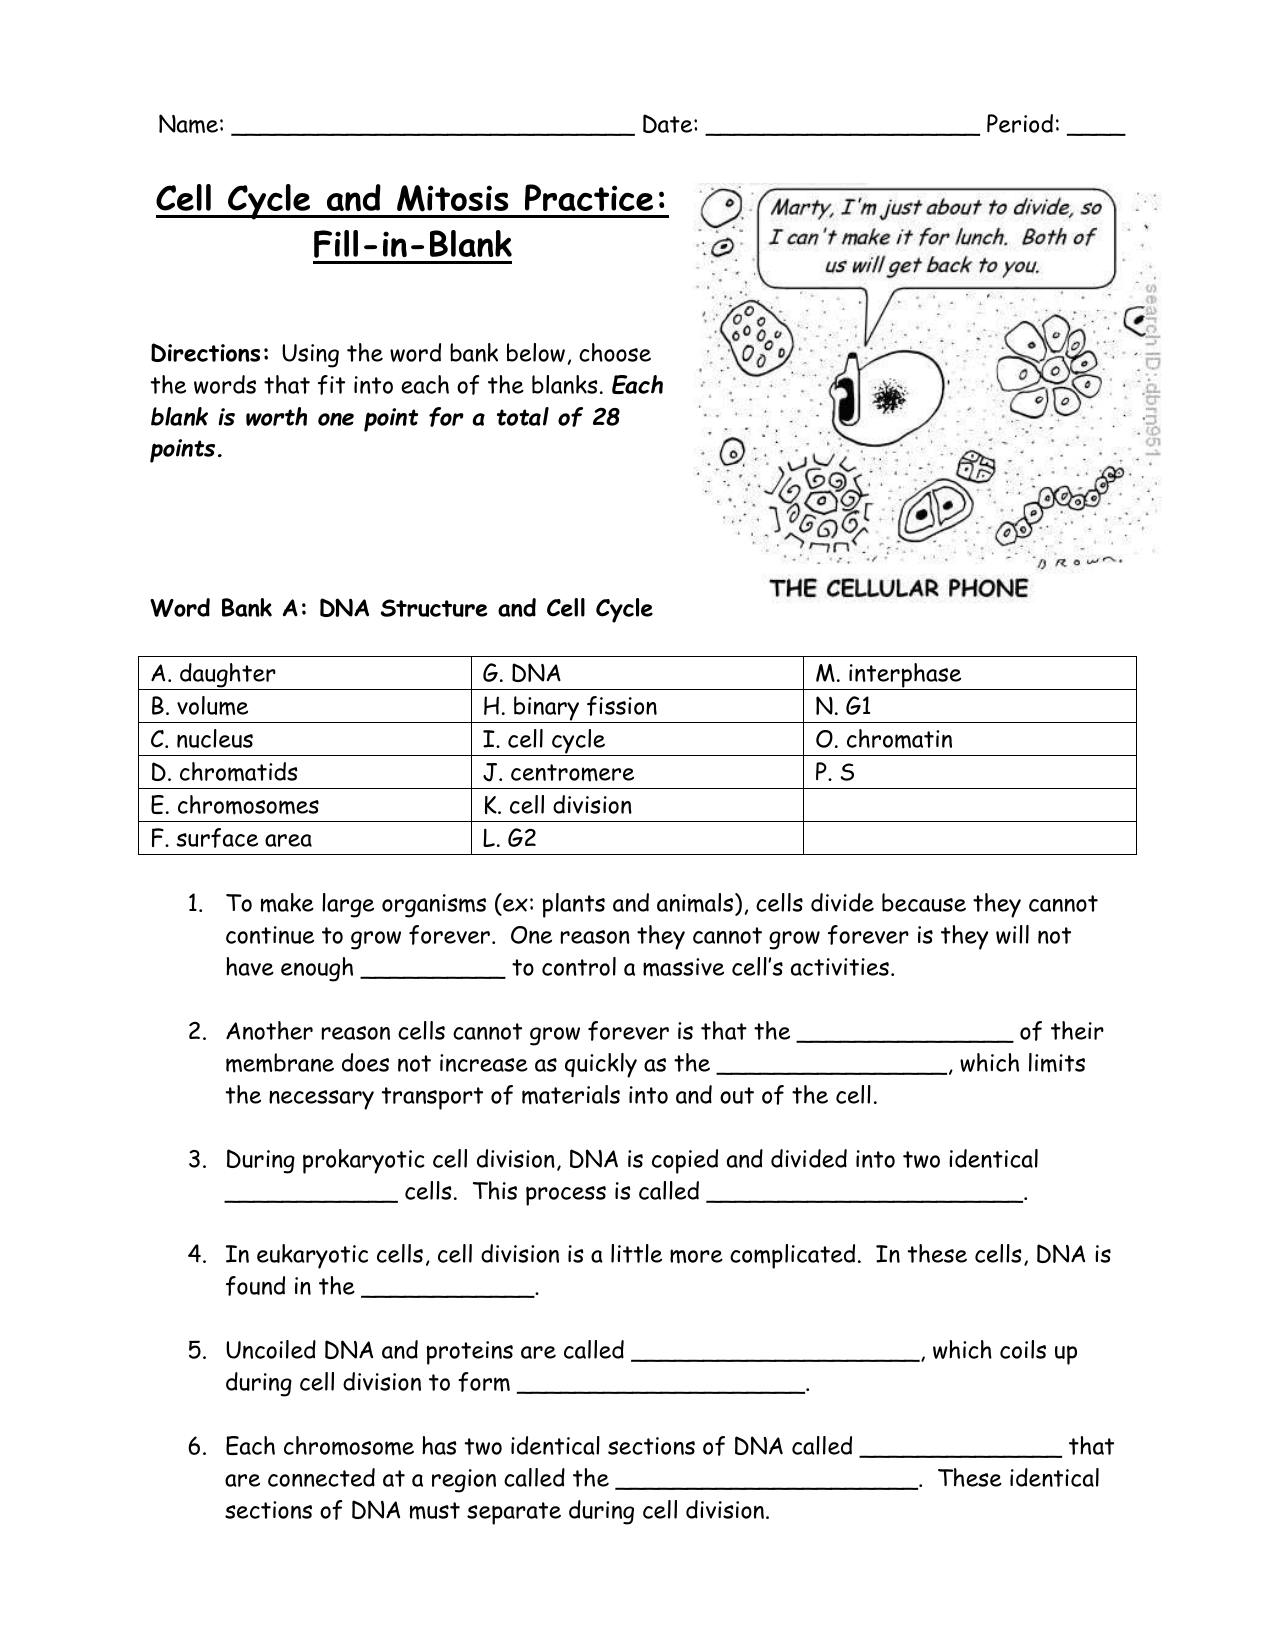 Mitosis Fill-in-the-Blank Worksheet With Cell Cycle Worksheet Answer Key